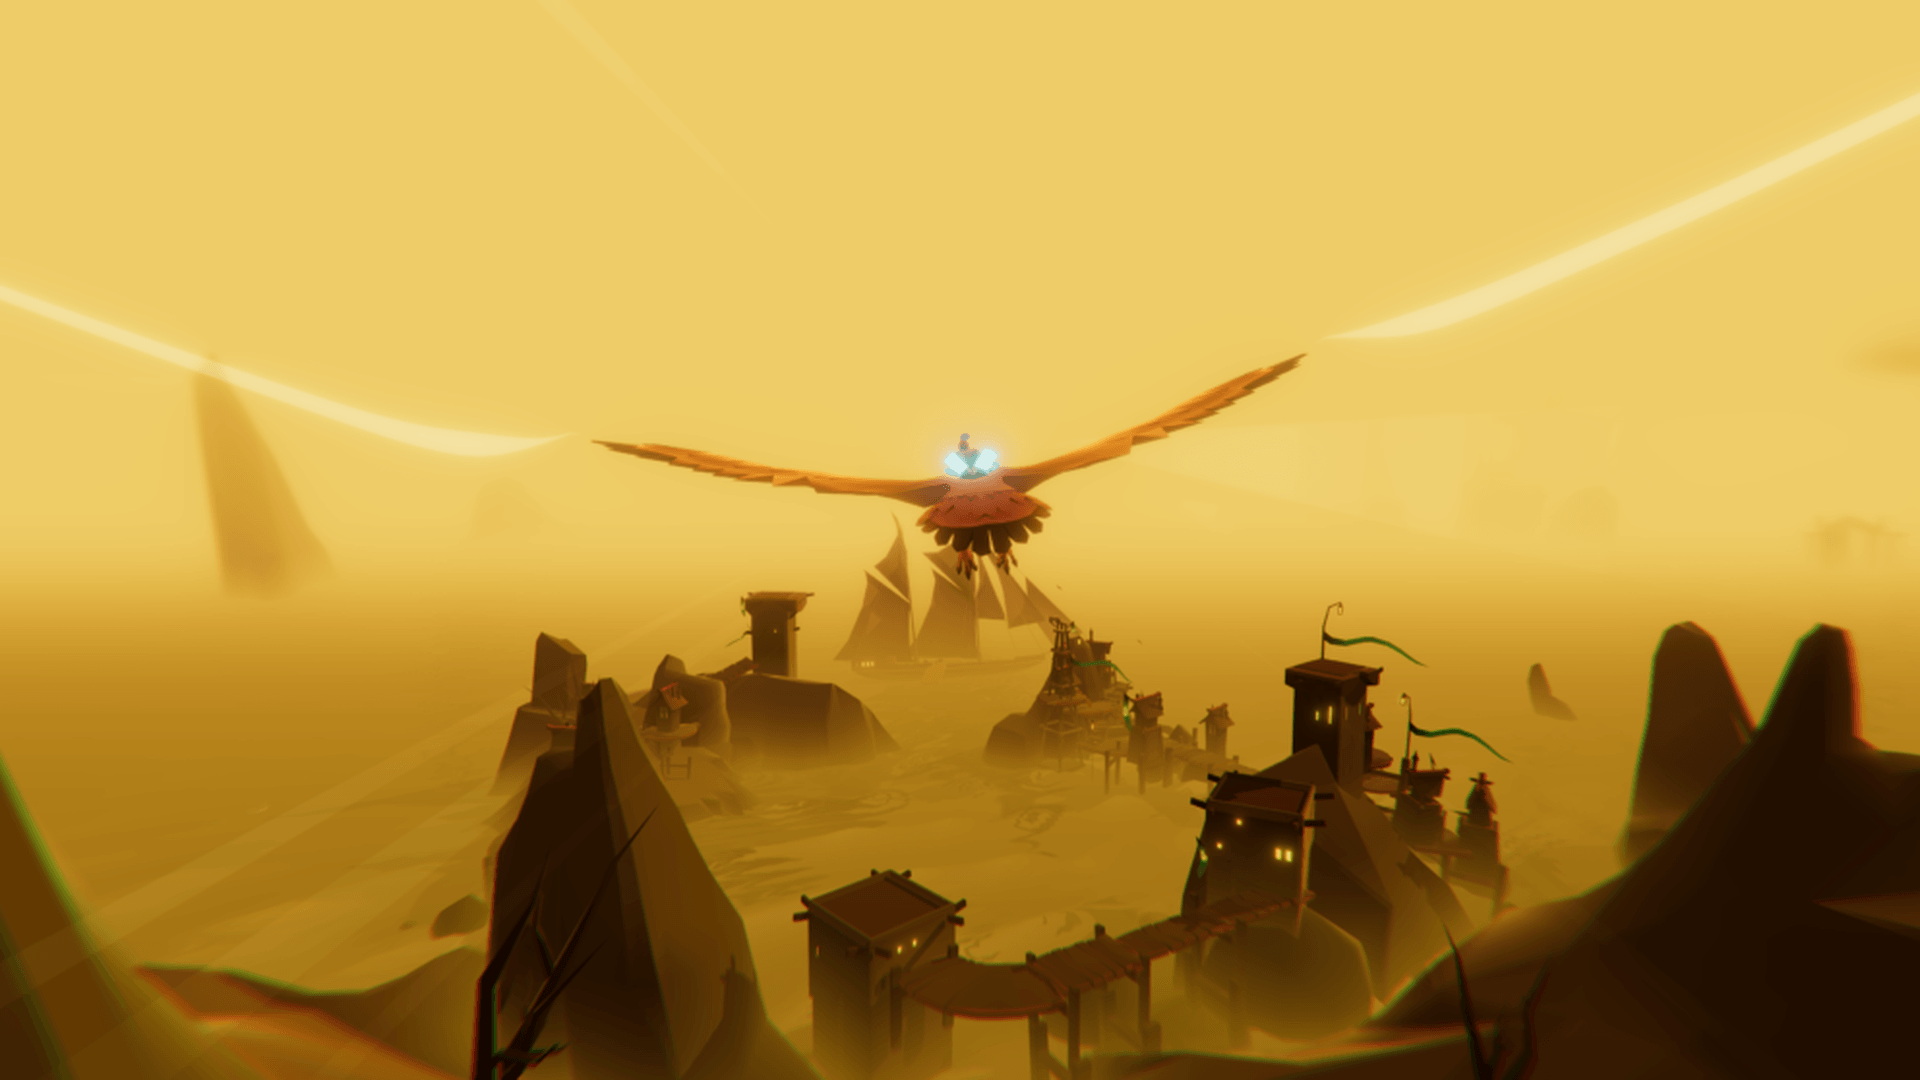 The Falconeer combines serene visuals with fantasy aerial